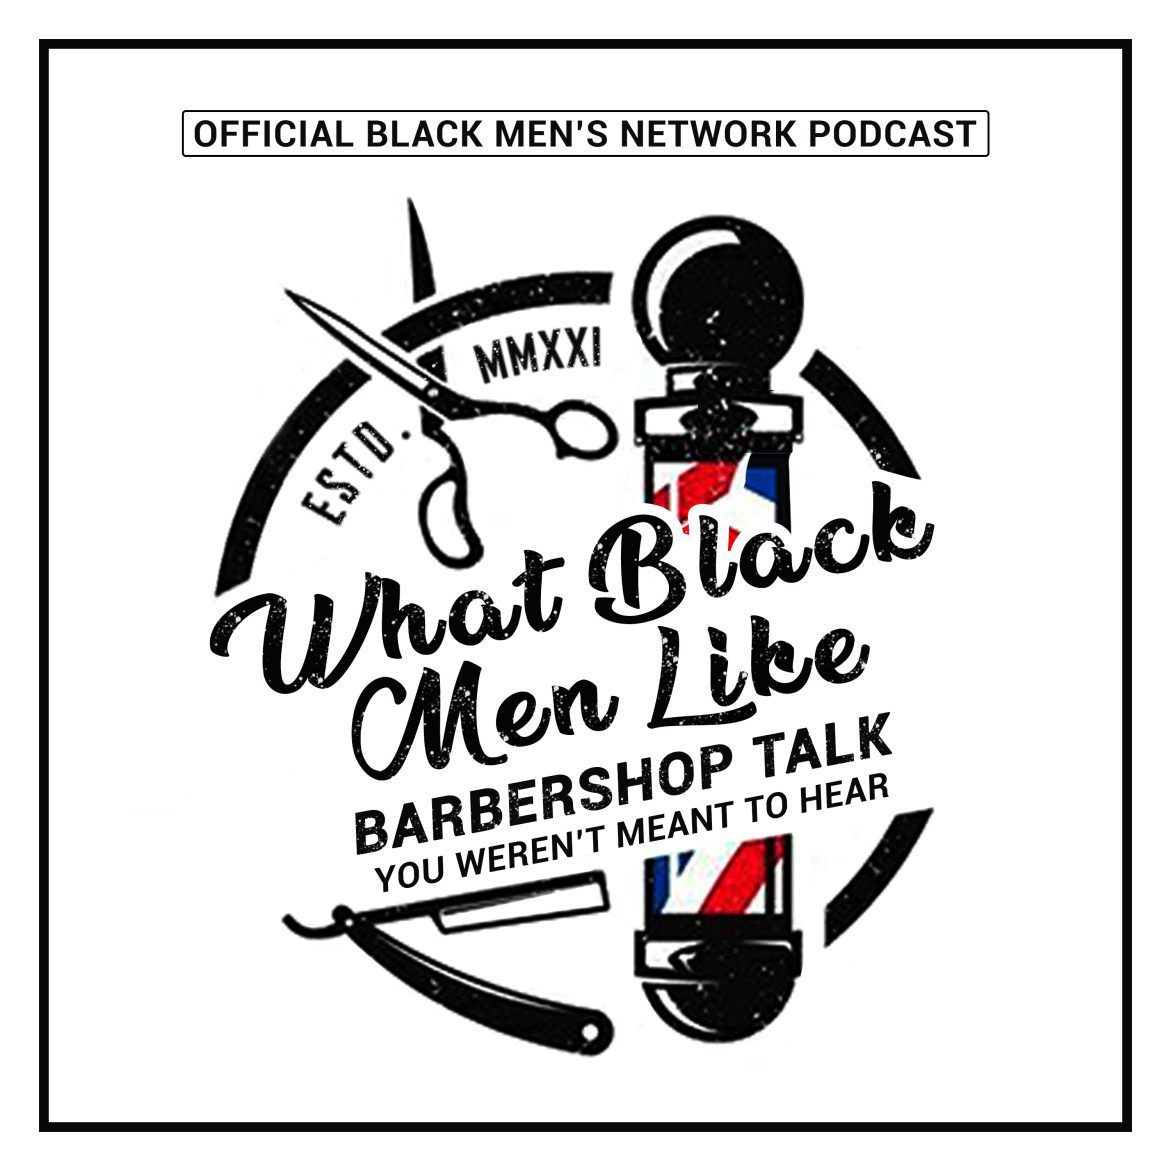 Black Podcasting - Is It Possible To Be "Happily Married"?